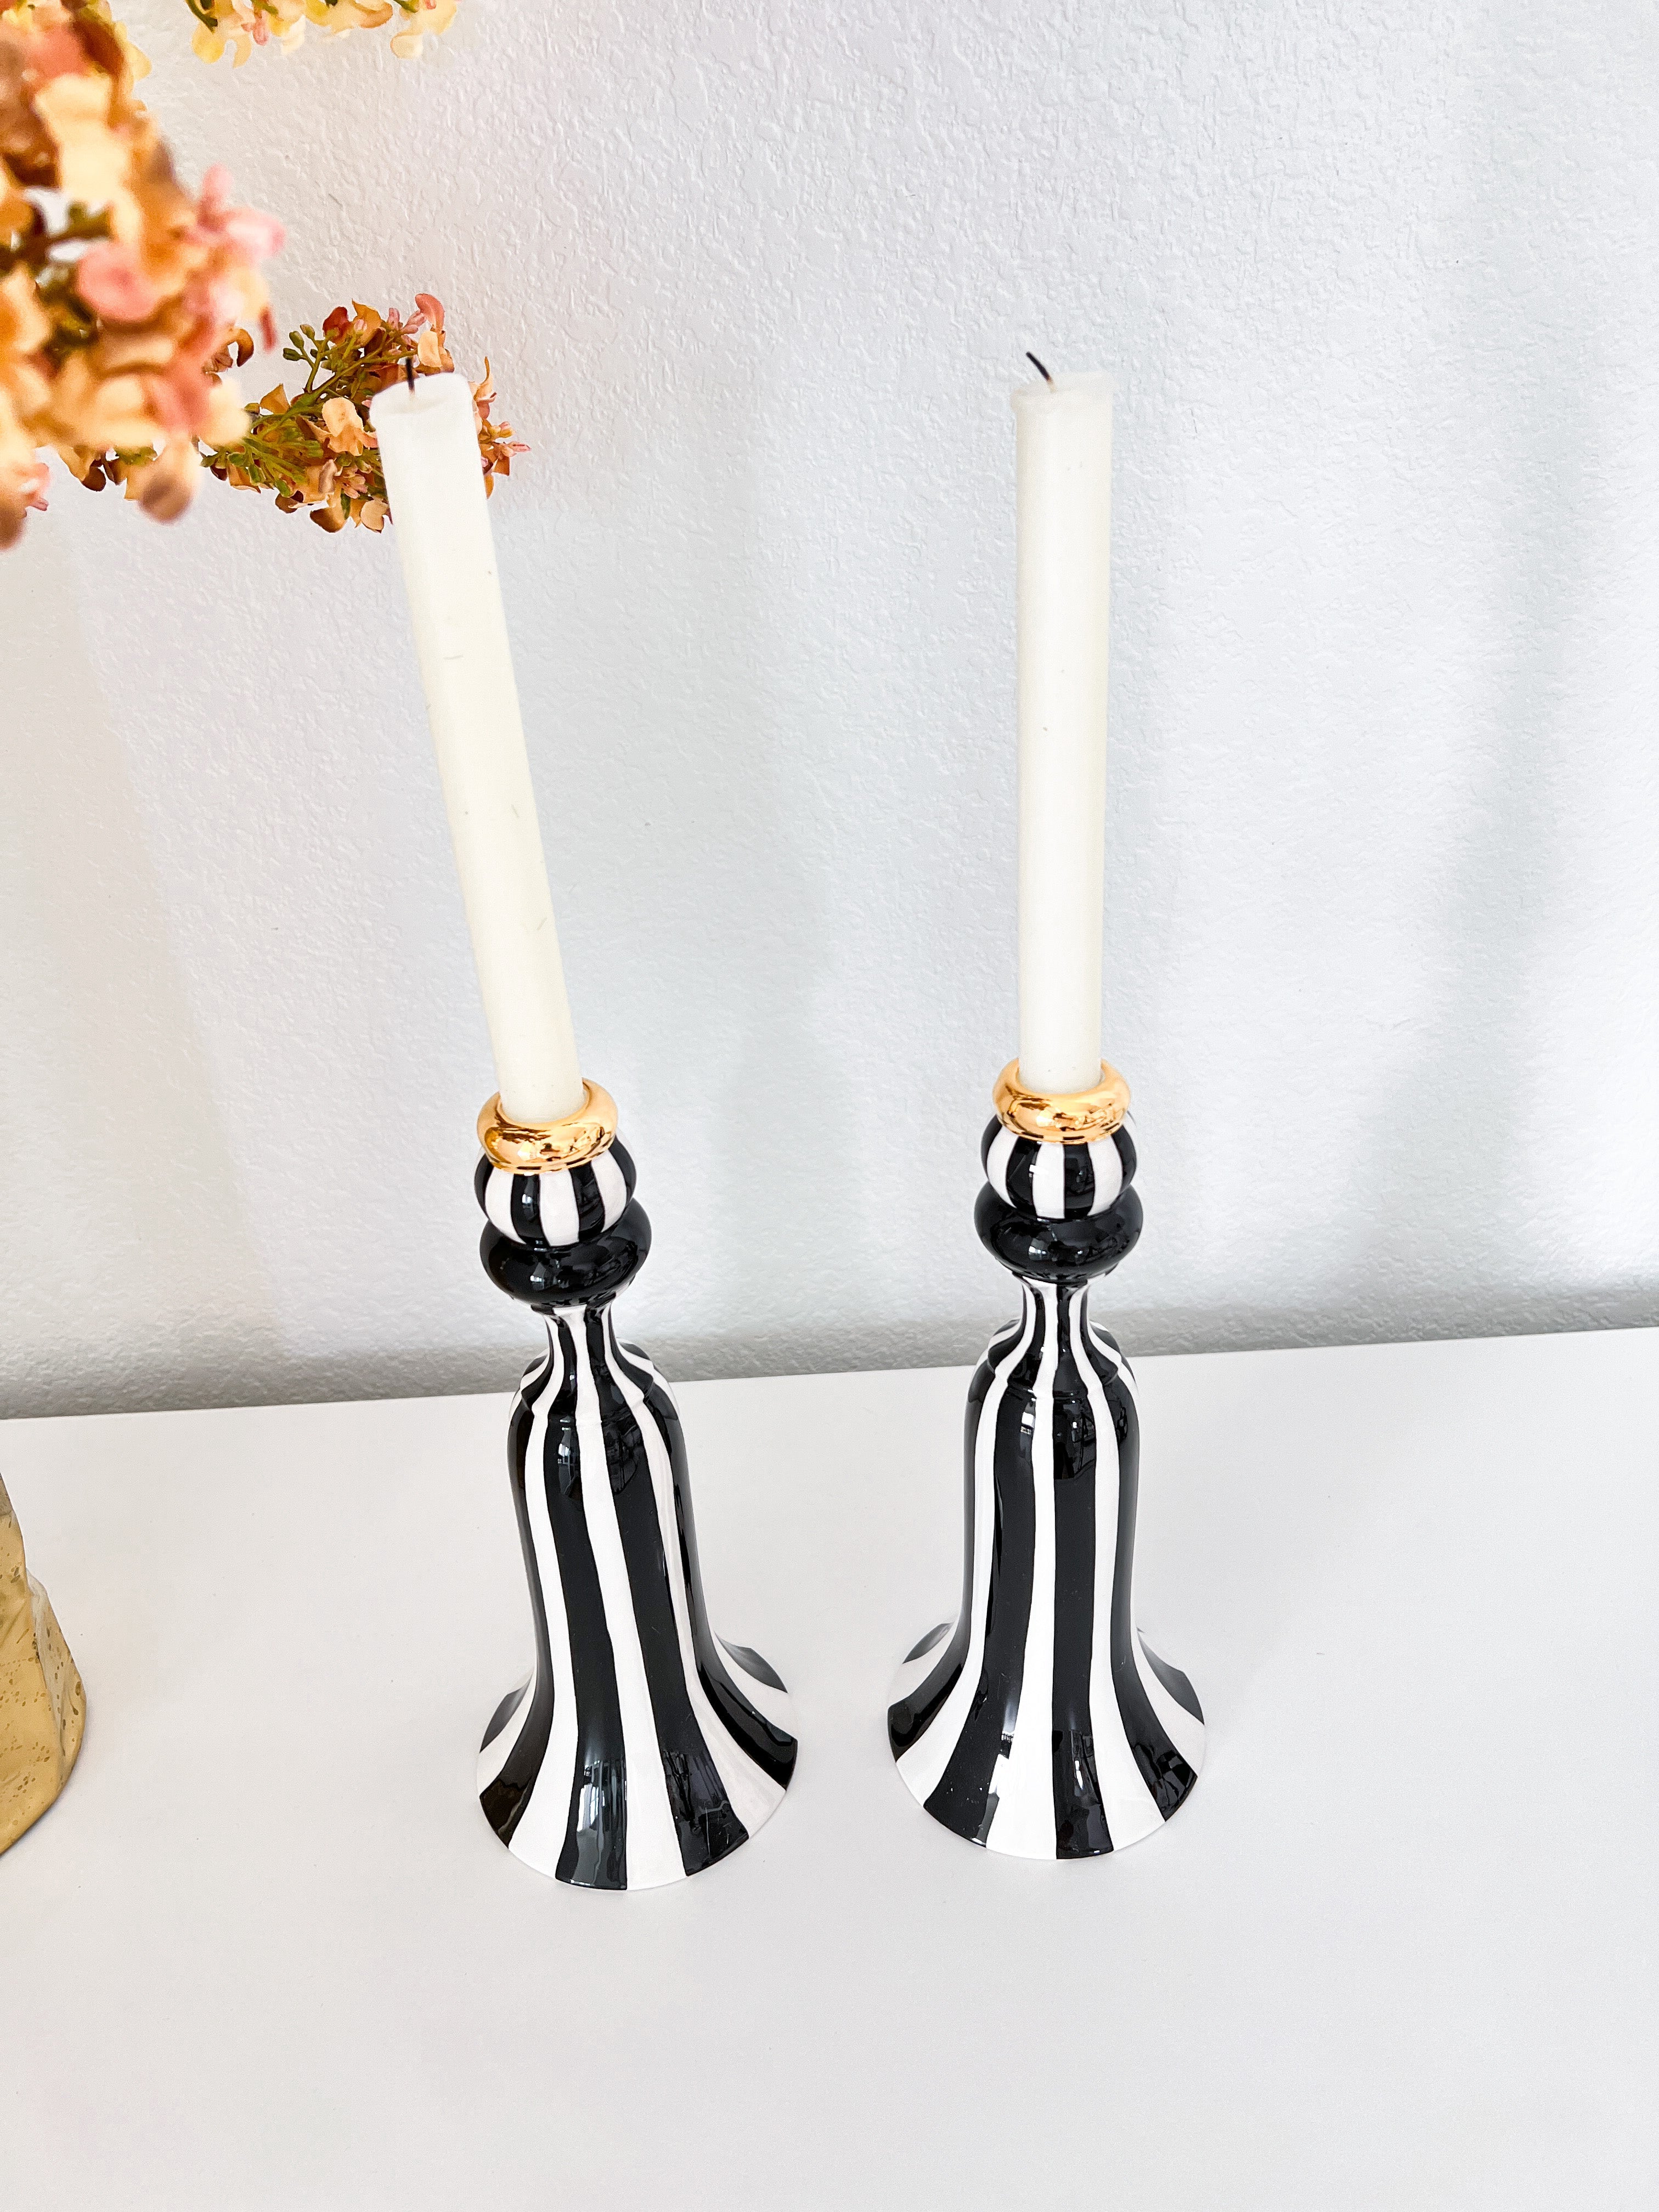 Black and White Striped Candle Holder - HTS HOME DECOR